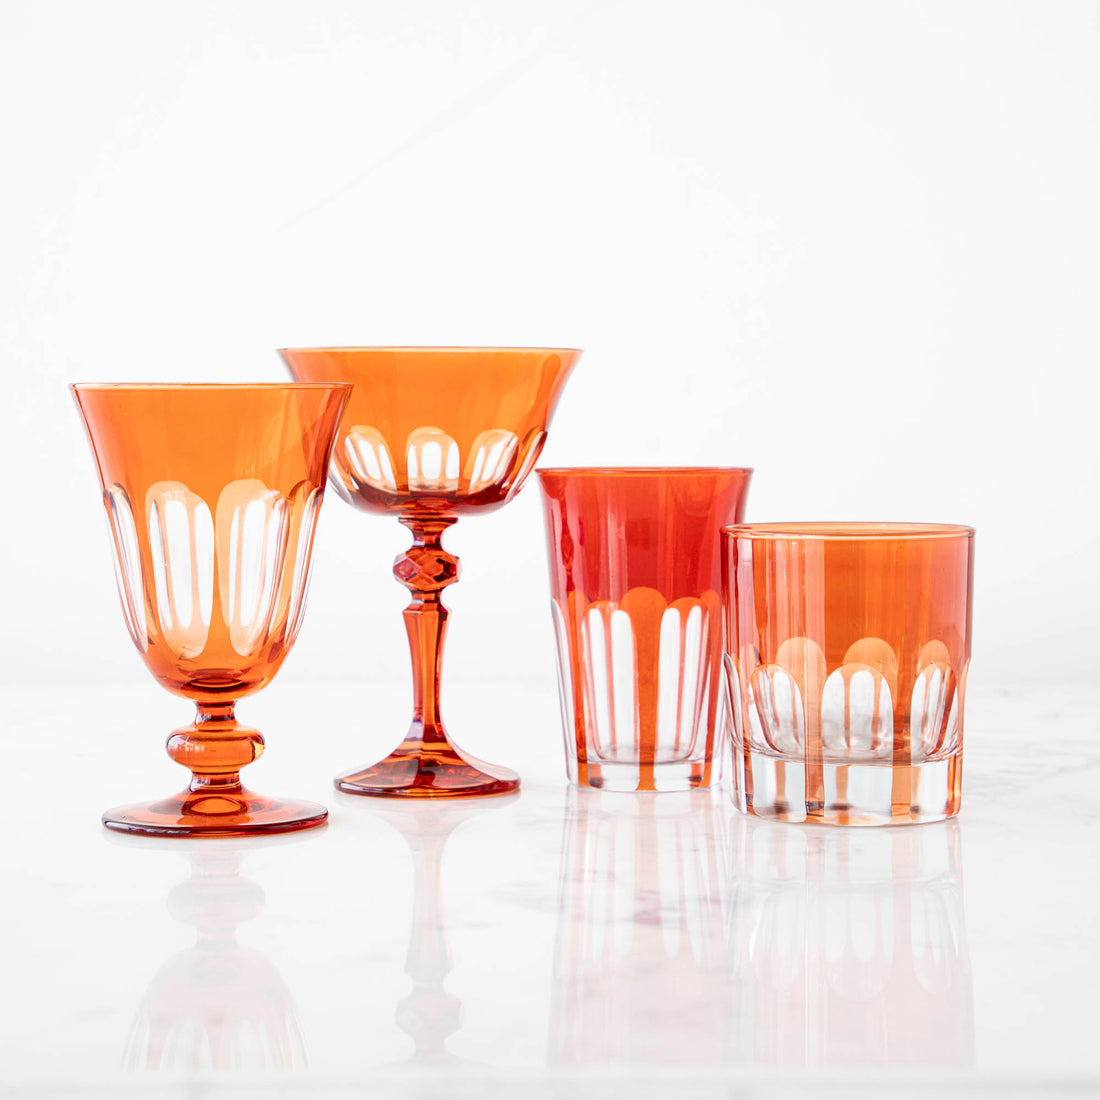 A collection of four dark red Rialto Lolita Glasses by SIR/MADAM on a reflective surface.